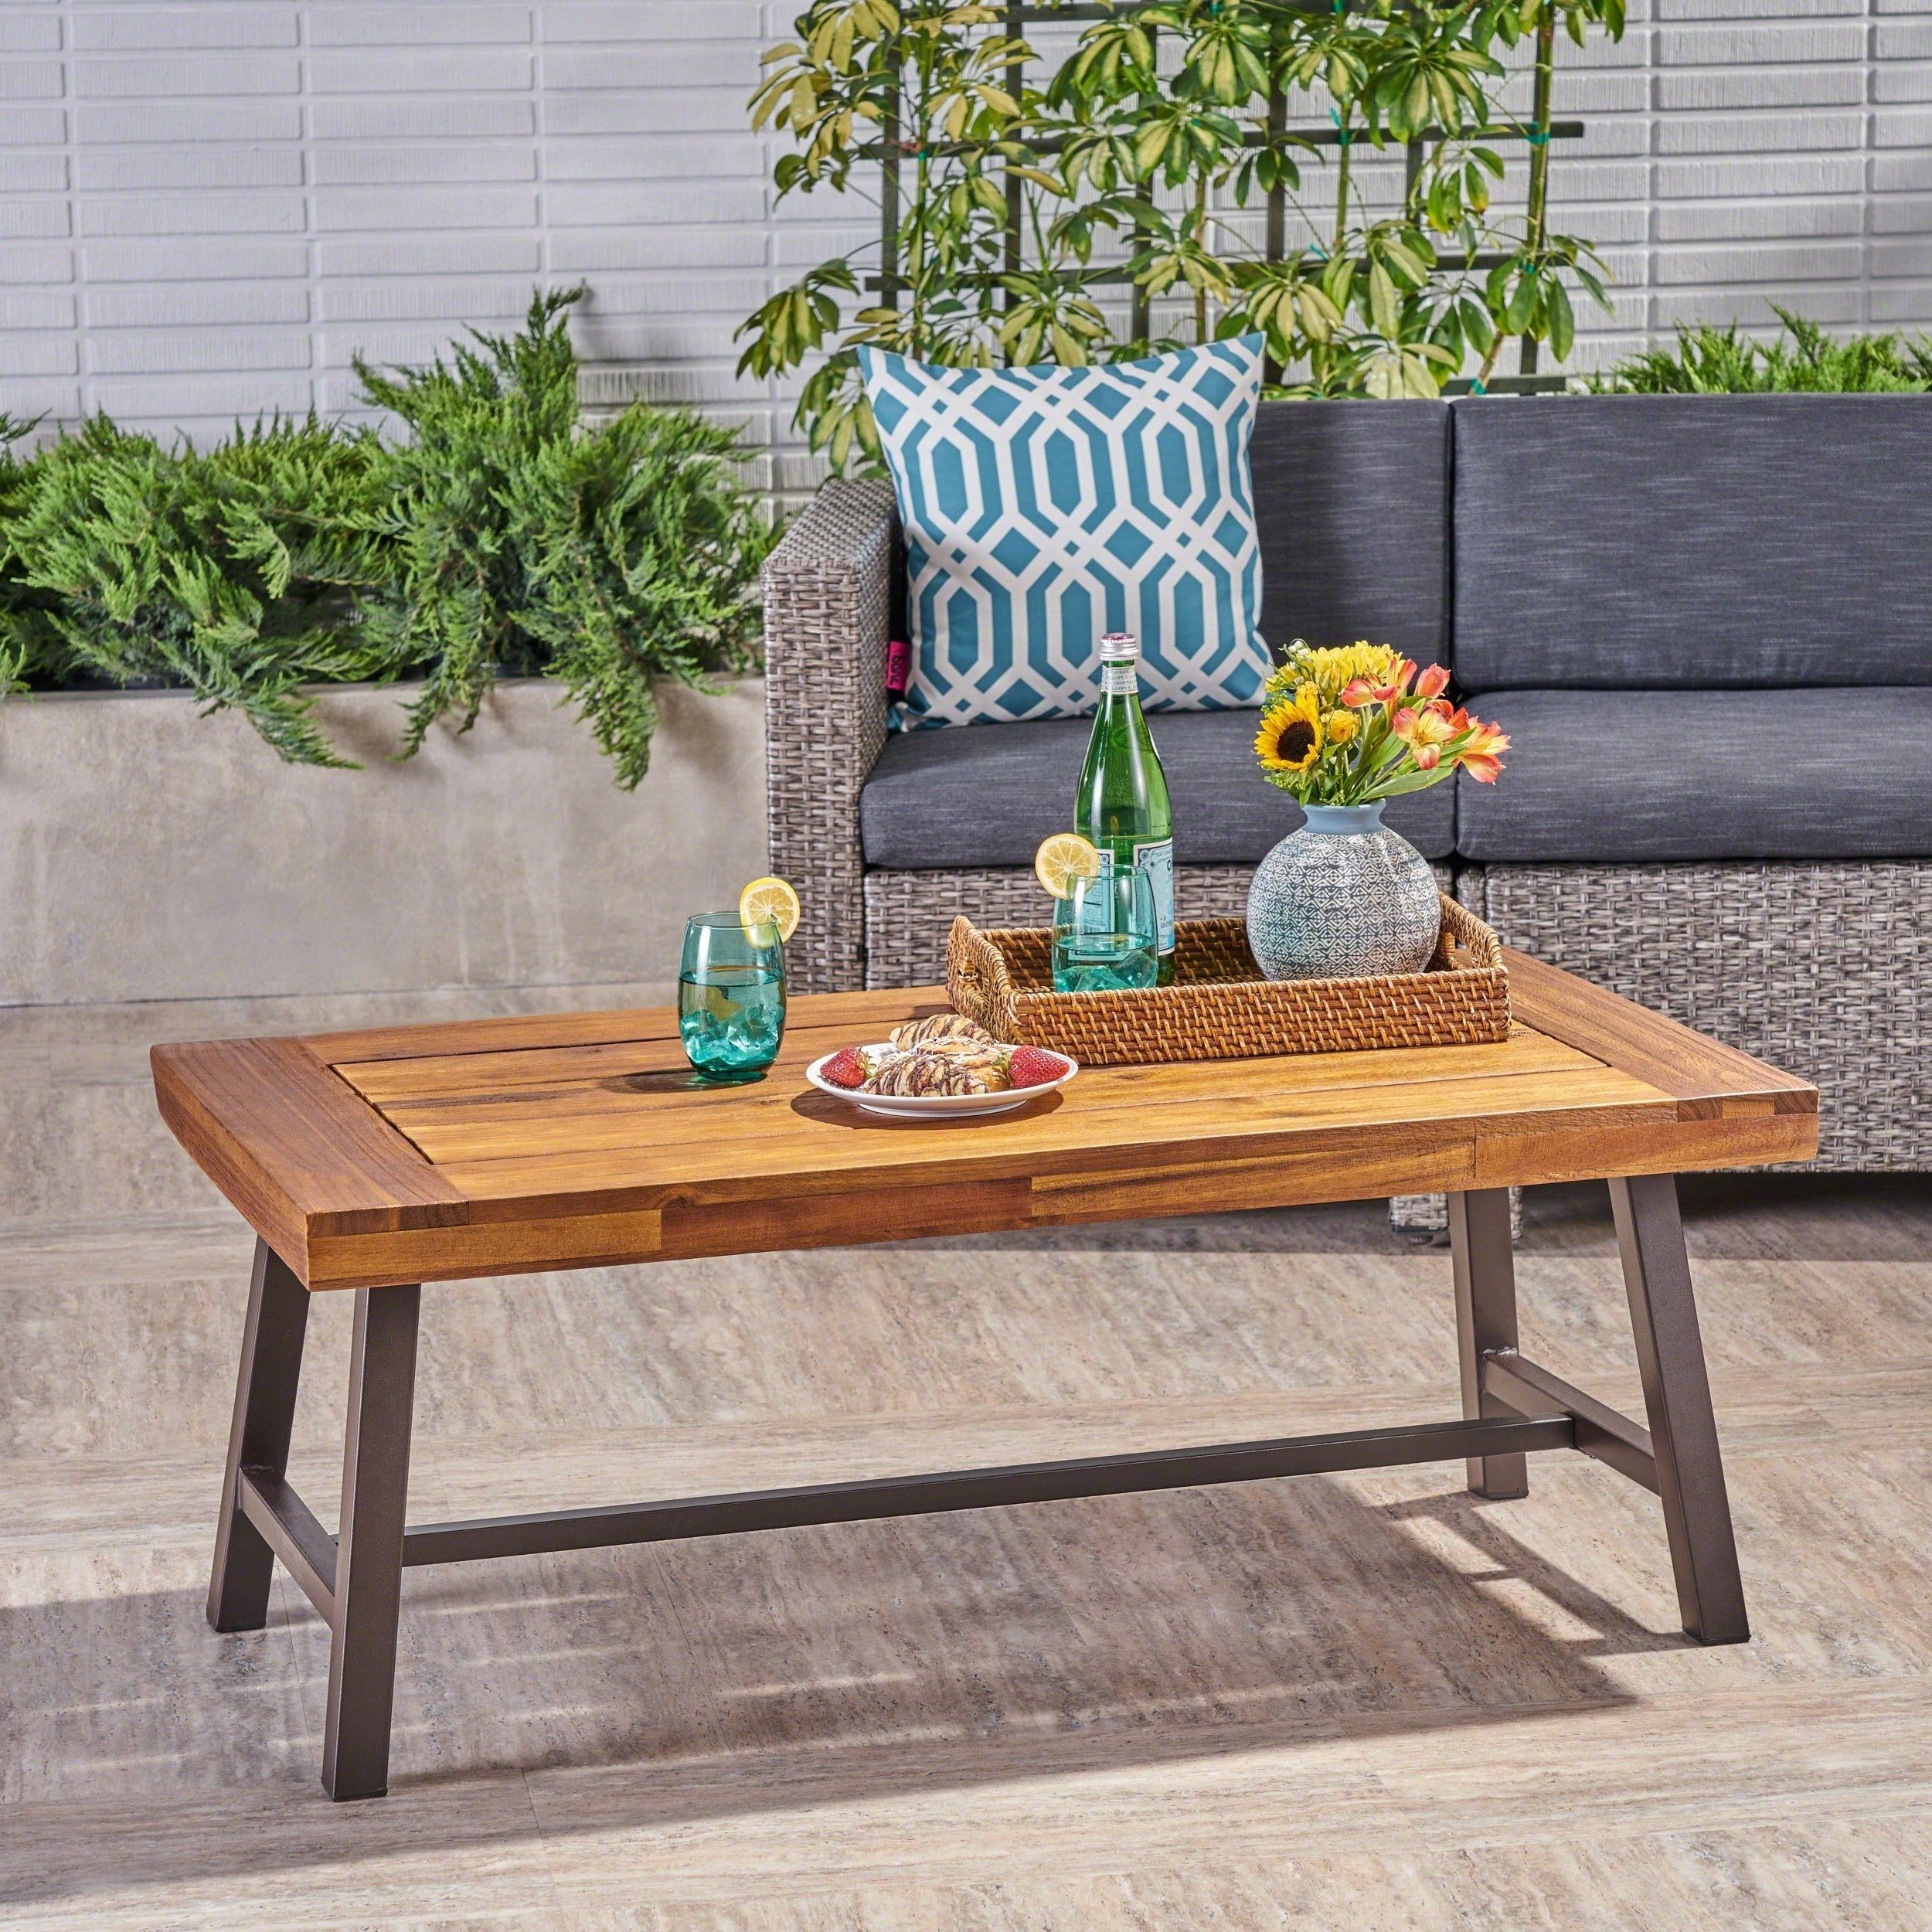 The Benefits Of A Small Outdoor Coffee Table – Coffee Table Decor Intended For Well Known Outdoor Half Round Coffee Tables (View 13 of 15)